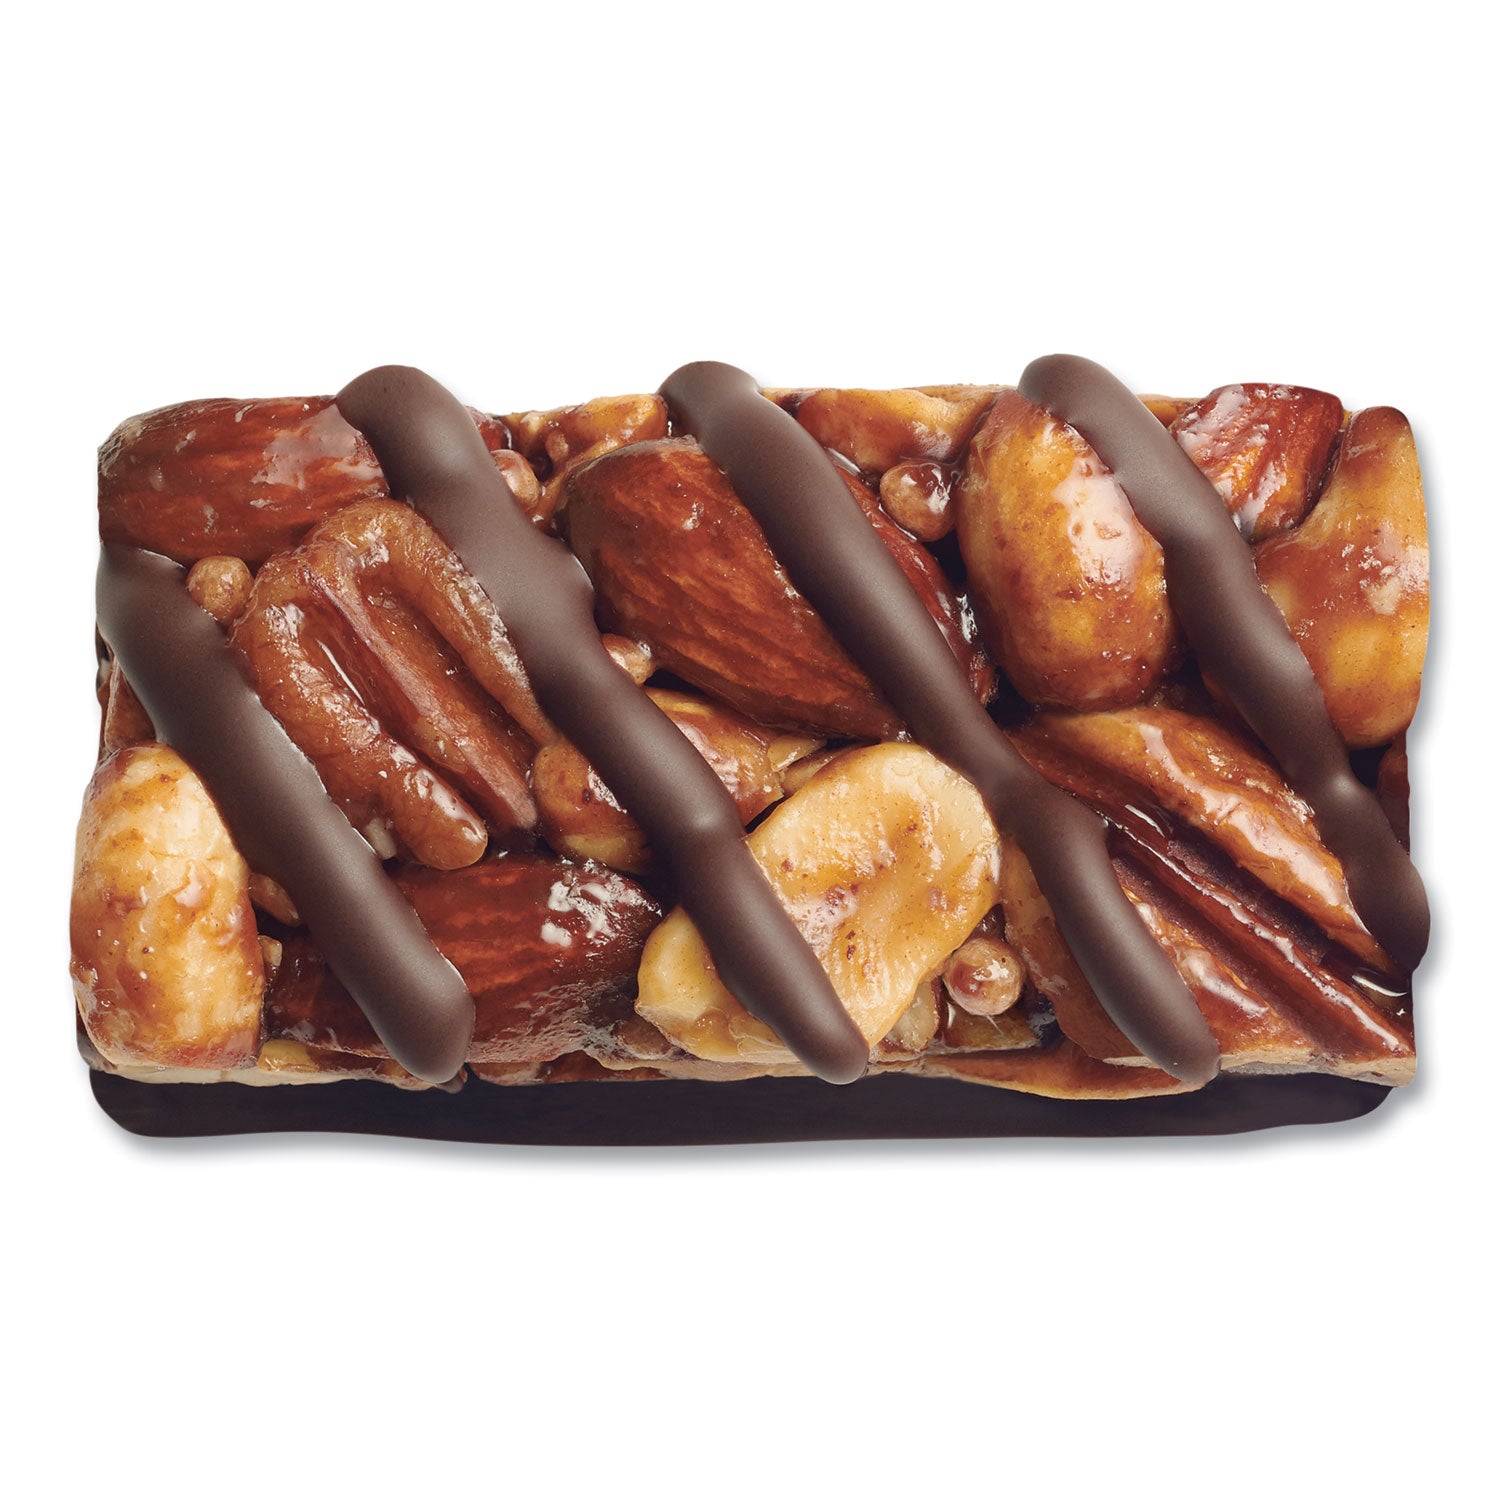 minis-salted-caramel-and-dark-chocolate-nut-dark-chocolate-almond-and-coconut-07-oz-20-pack_knd27970 - 5